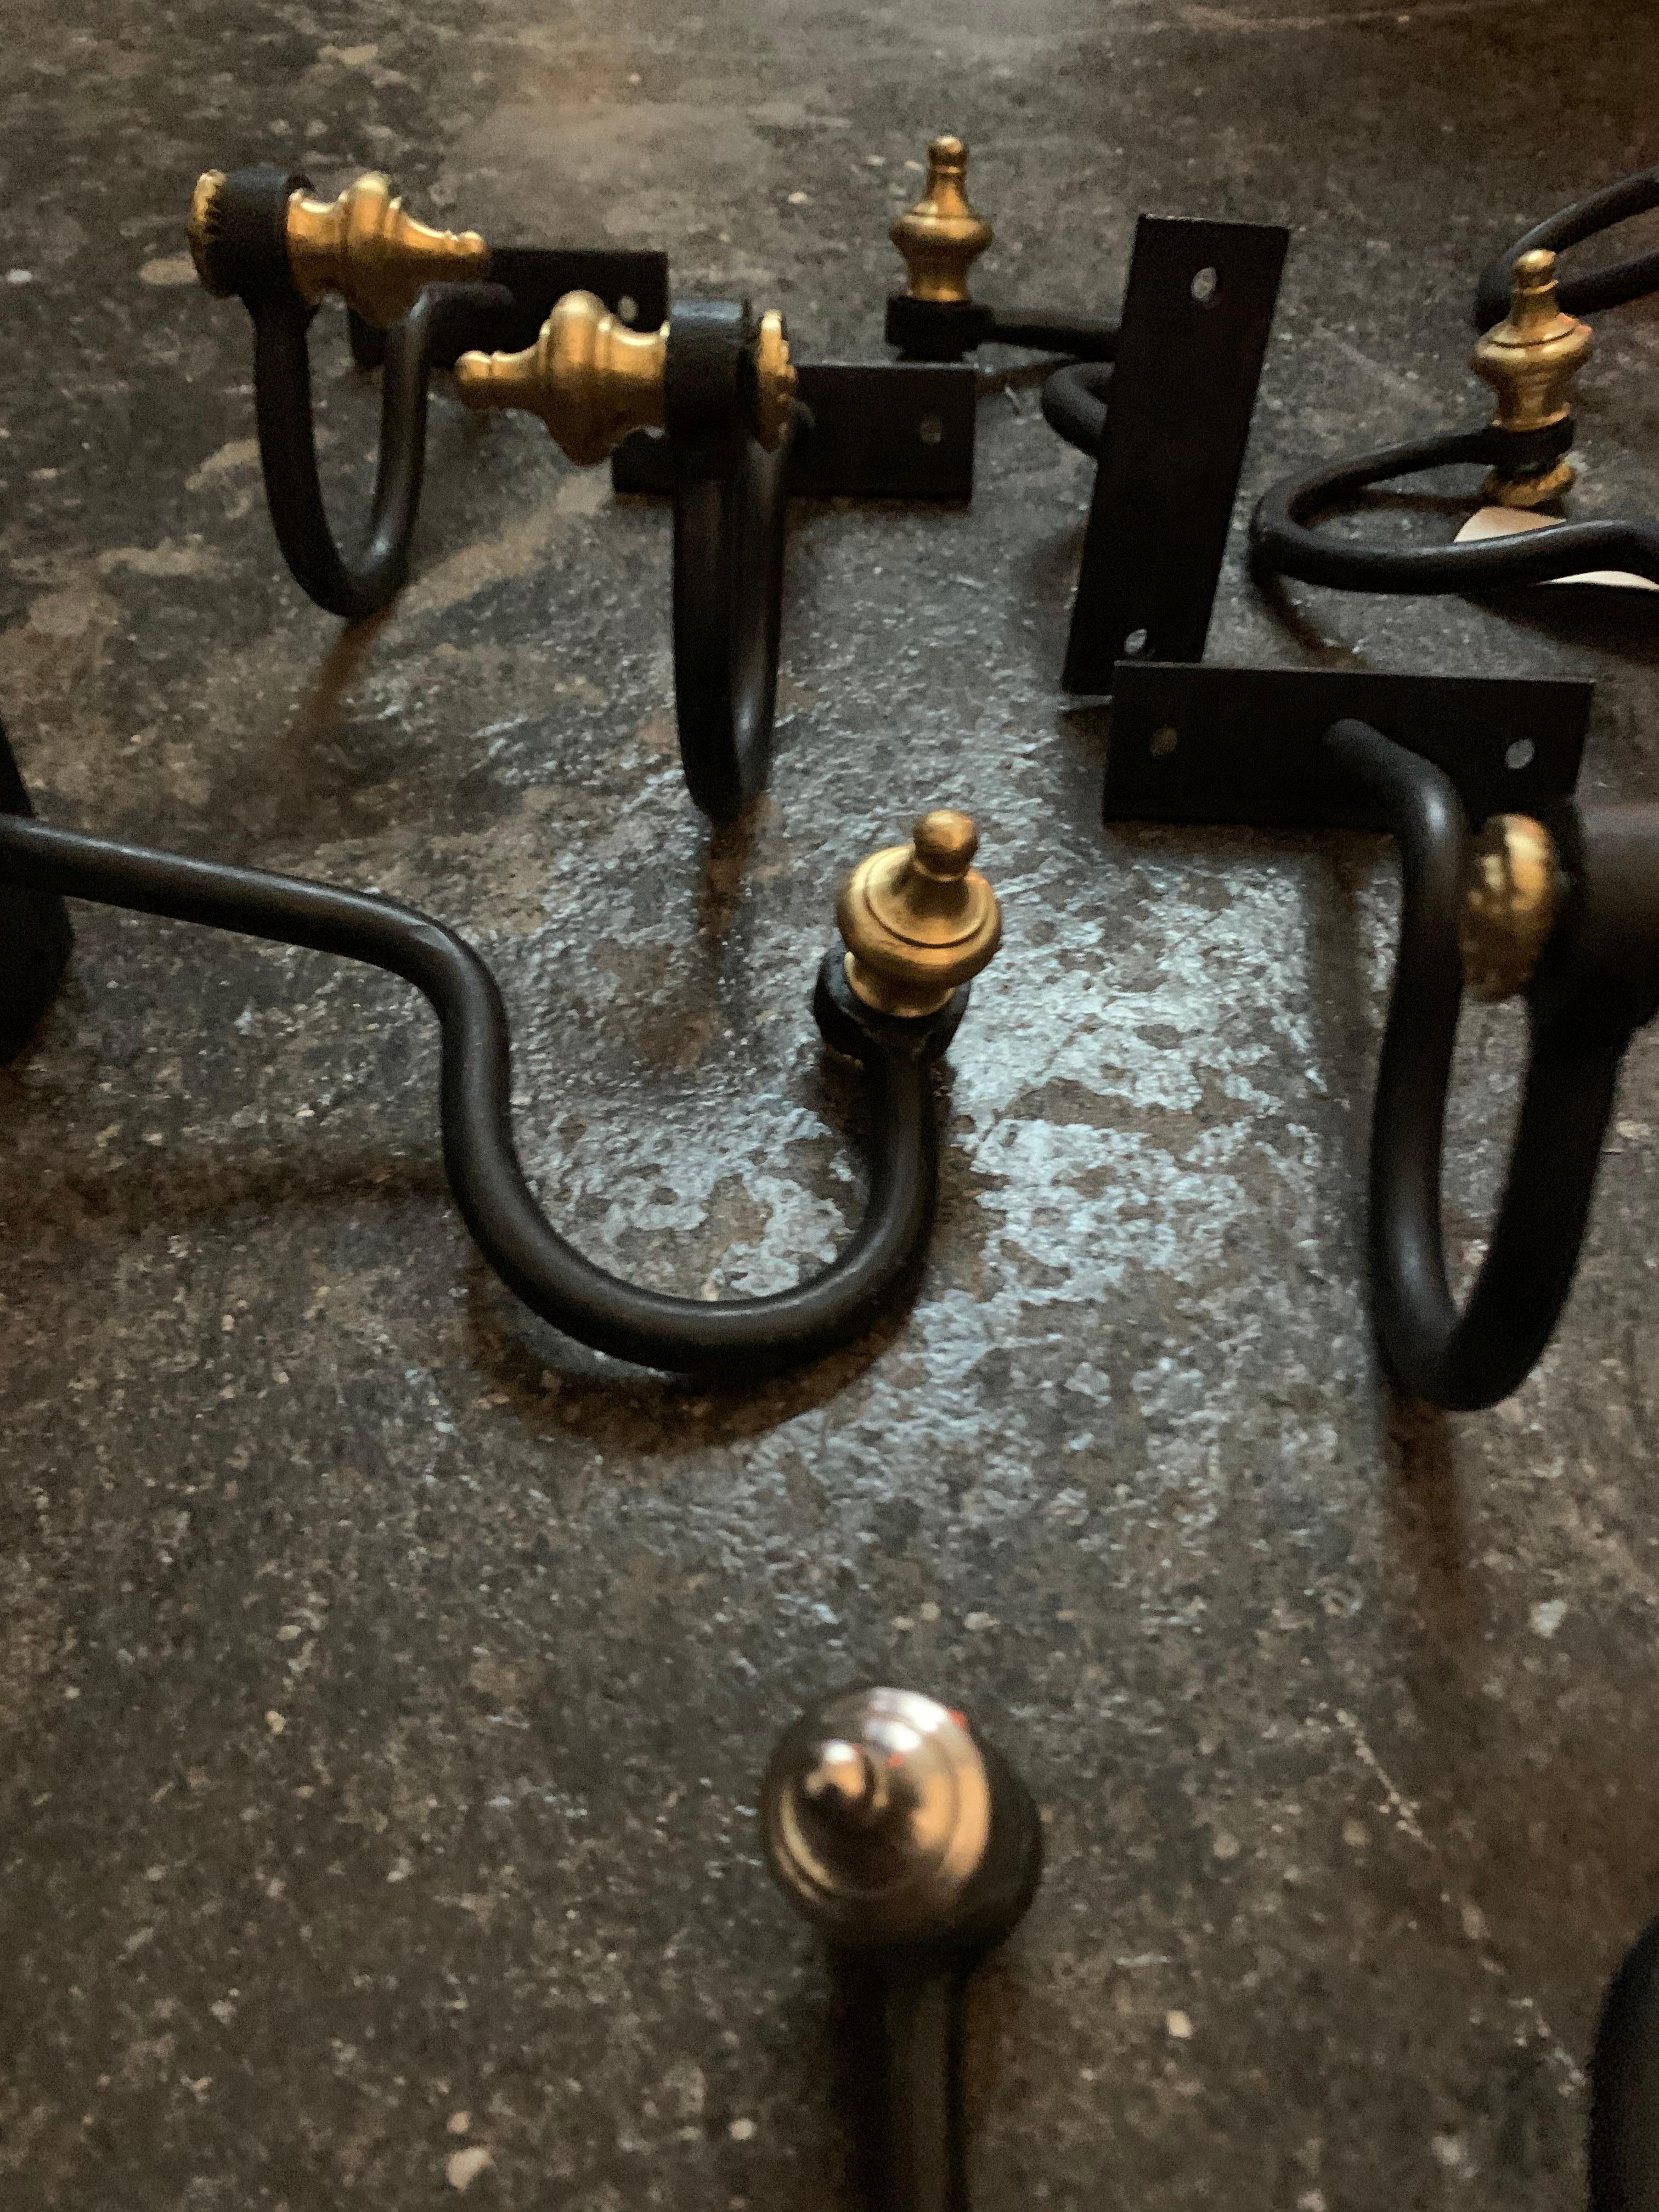 Antique wrought iron fireplace jamb hook, brass, steel, Industrial Mod, wall hook, rack. Highly functional, variety of uses. Listing is for single hook. 10 available. 9 brass and 1 silver tone steel. See photos. Please change quantity to purchase